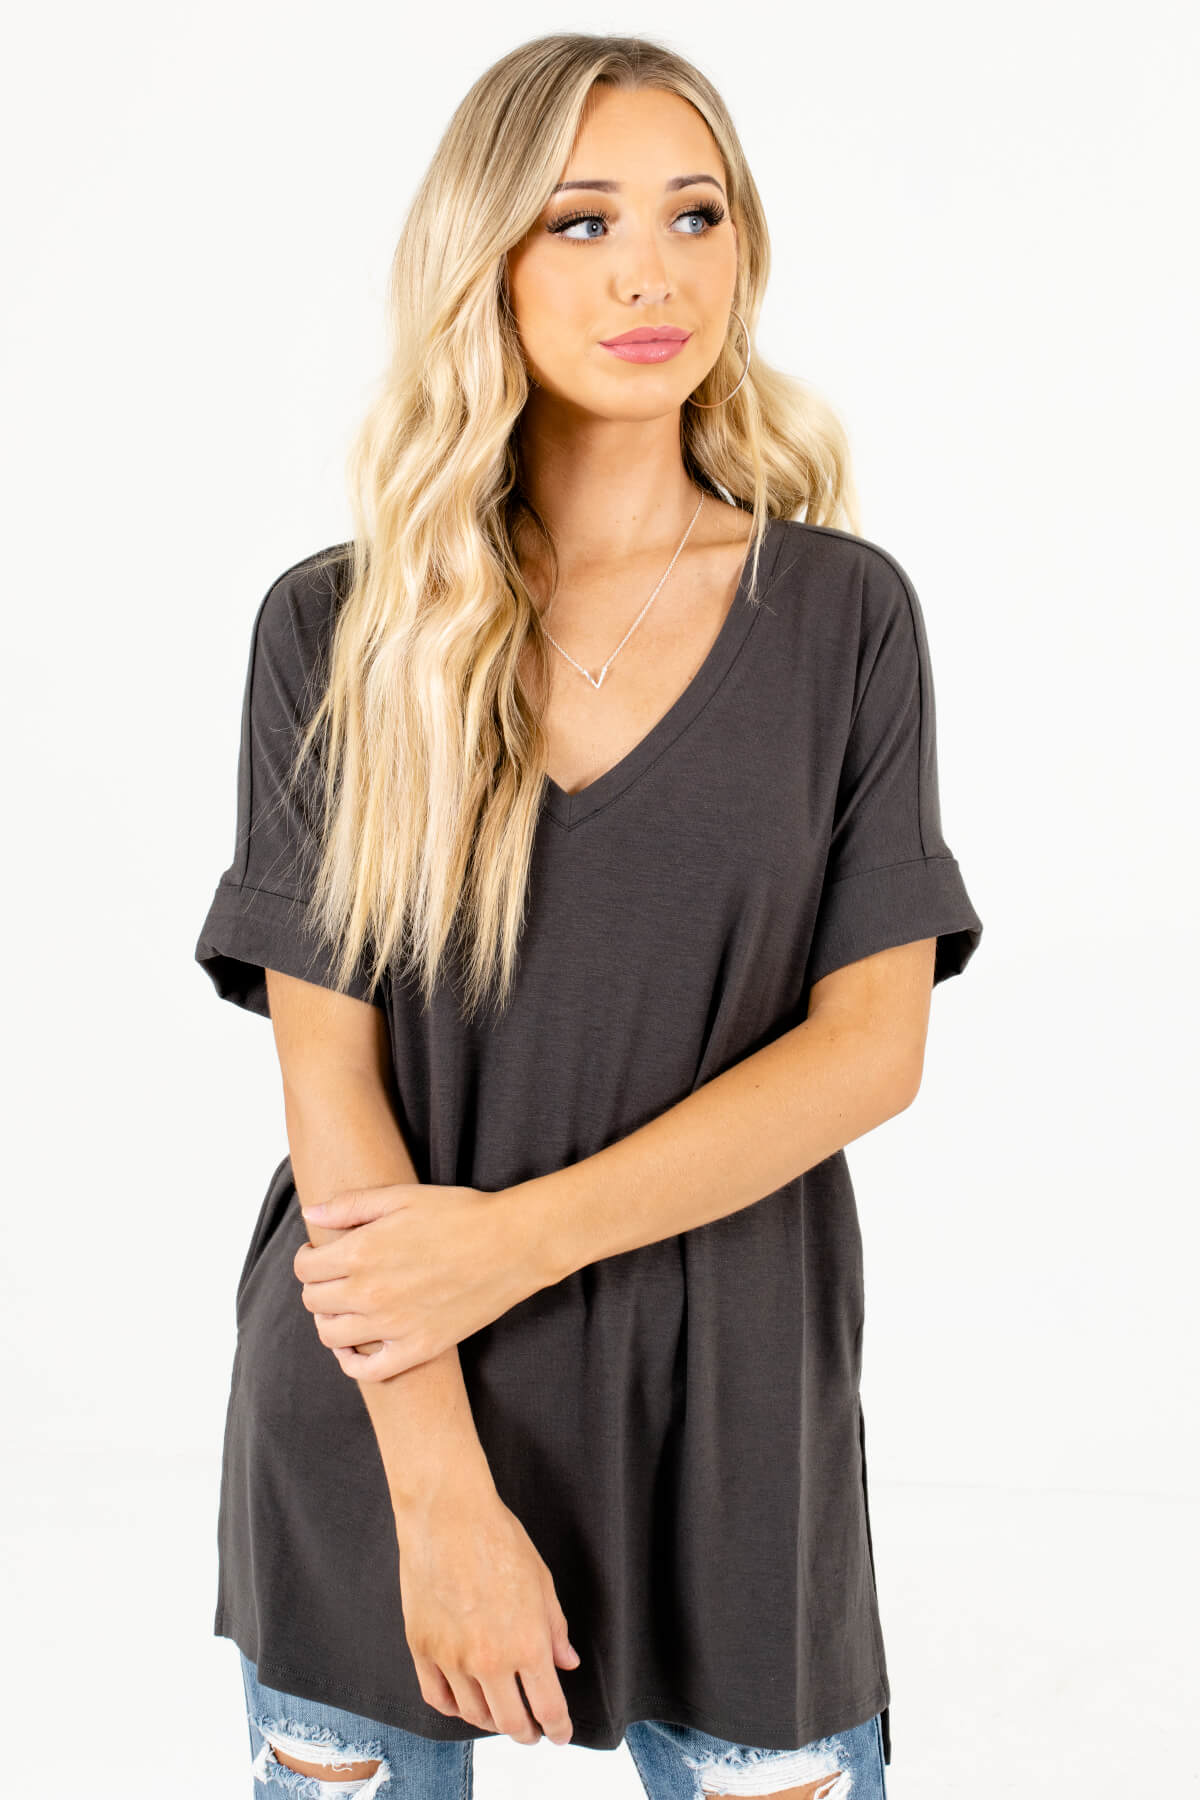 Women’s Ash Gray Oversized Relaxed Fit Boutique Top